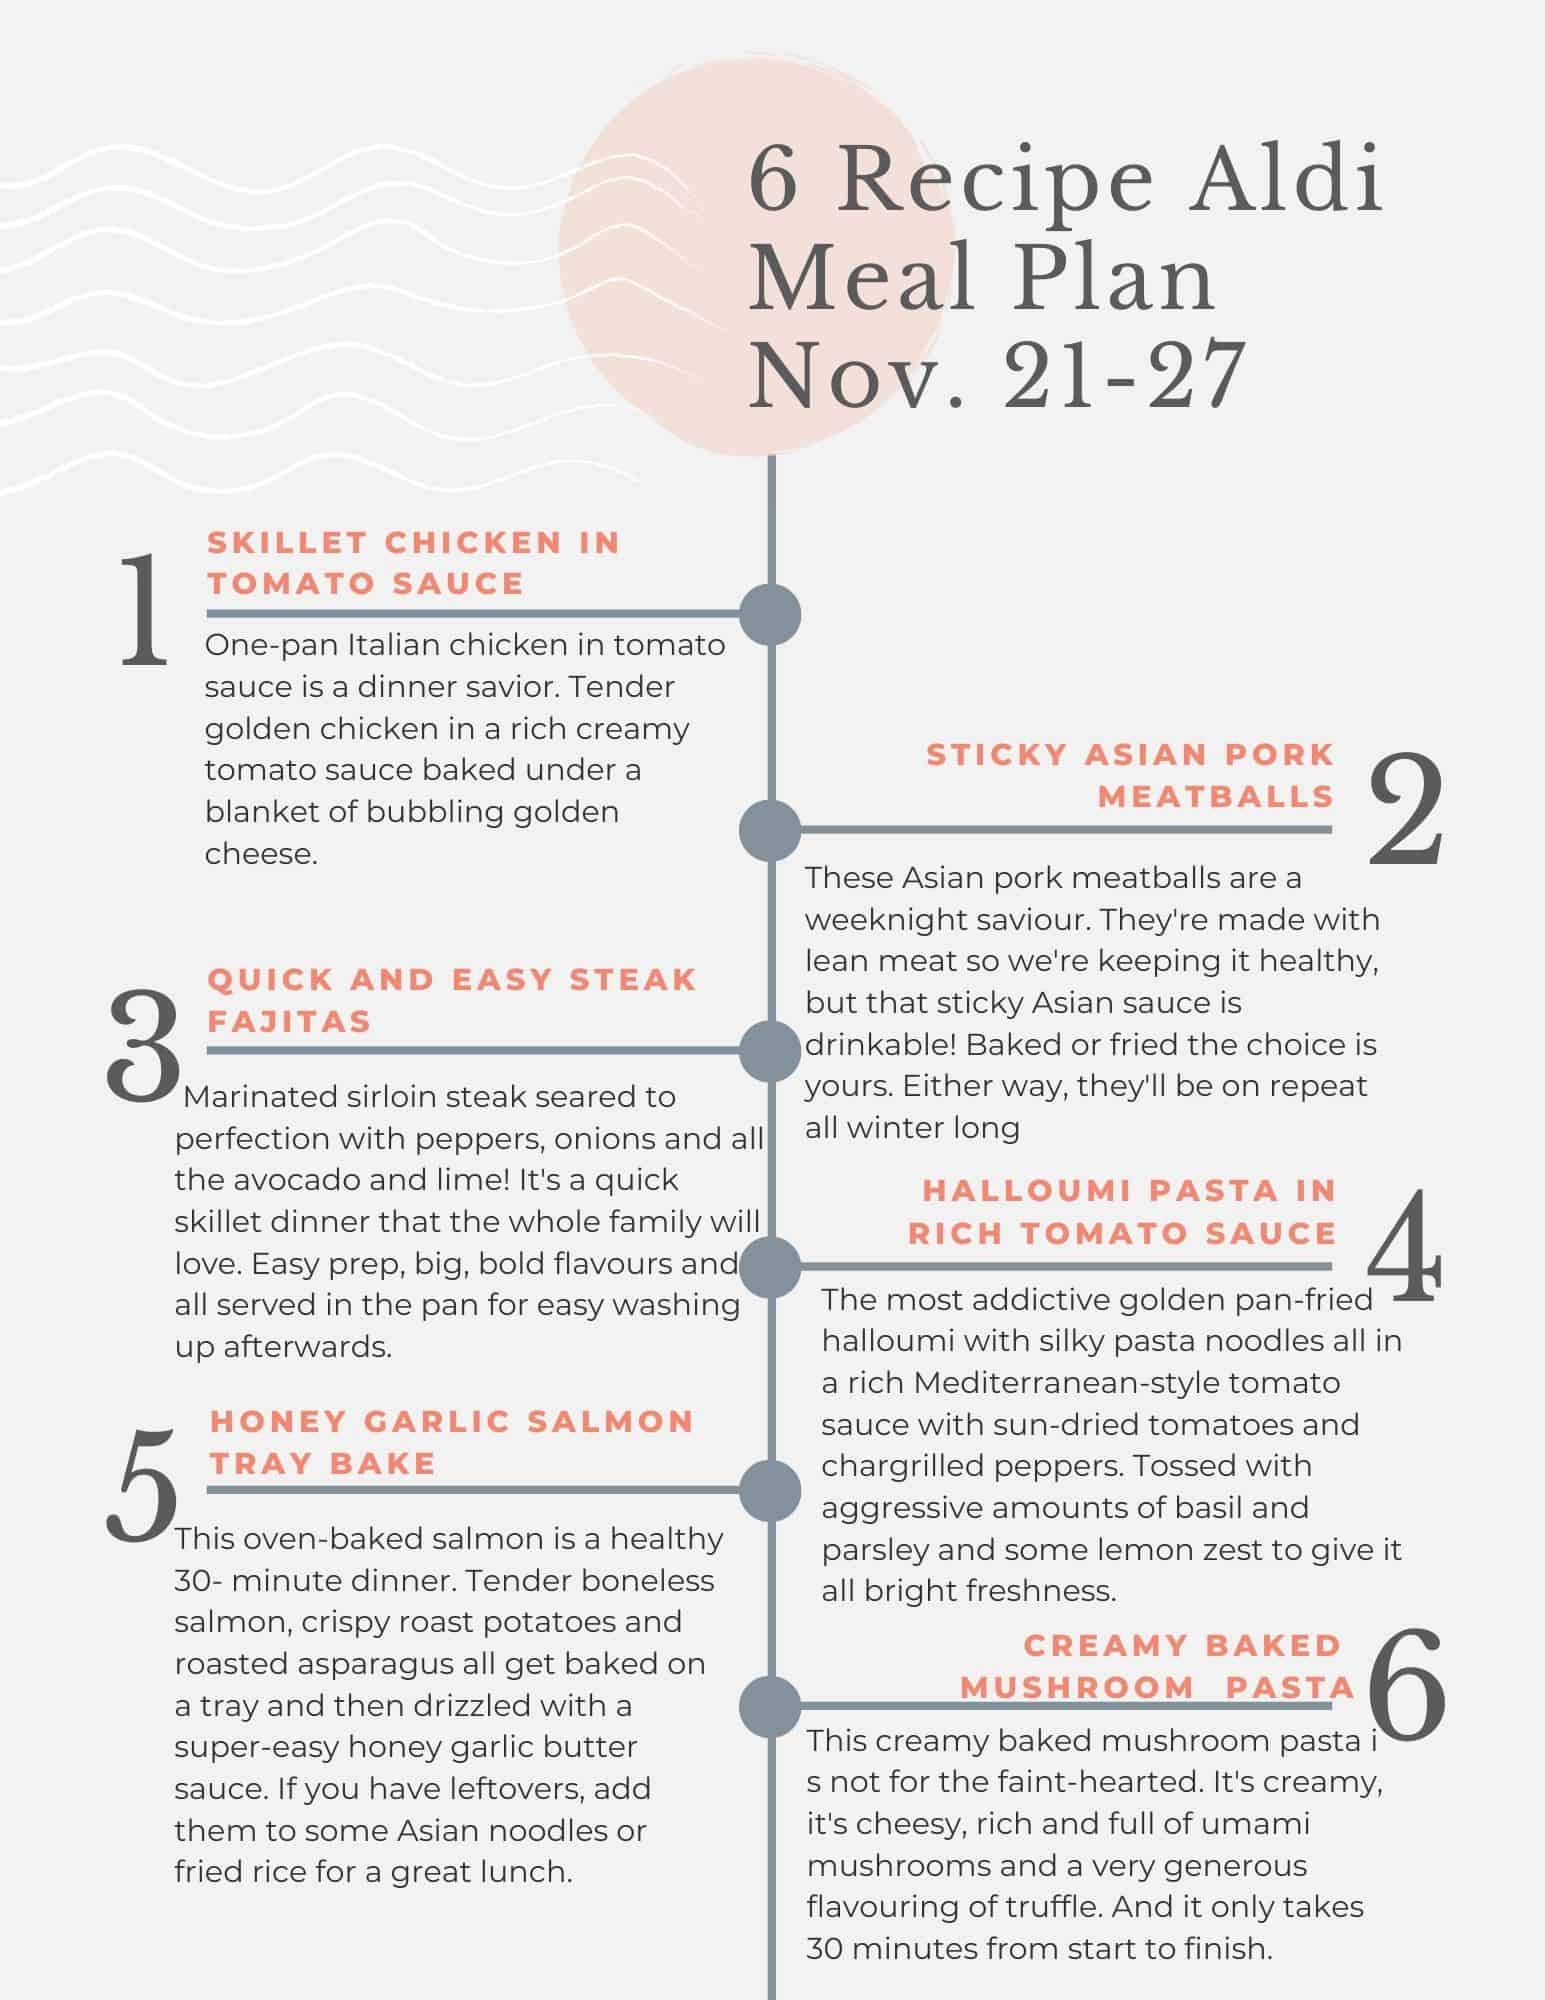 Cheap, easy and healthy budget meal plan for families.